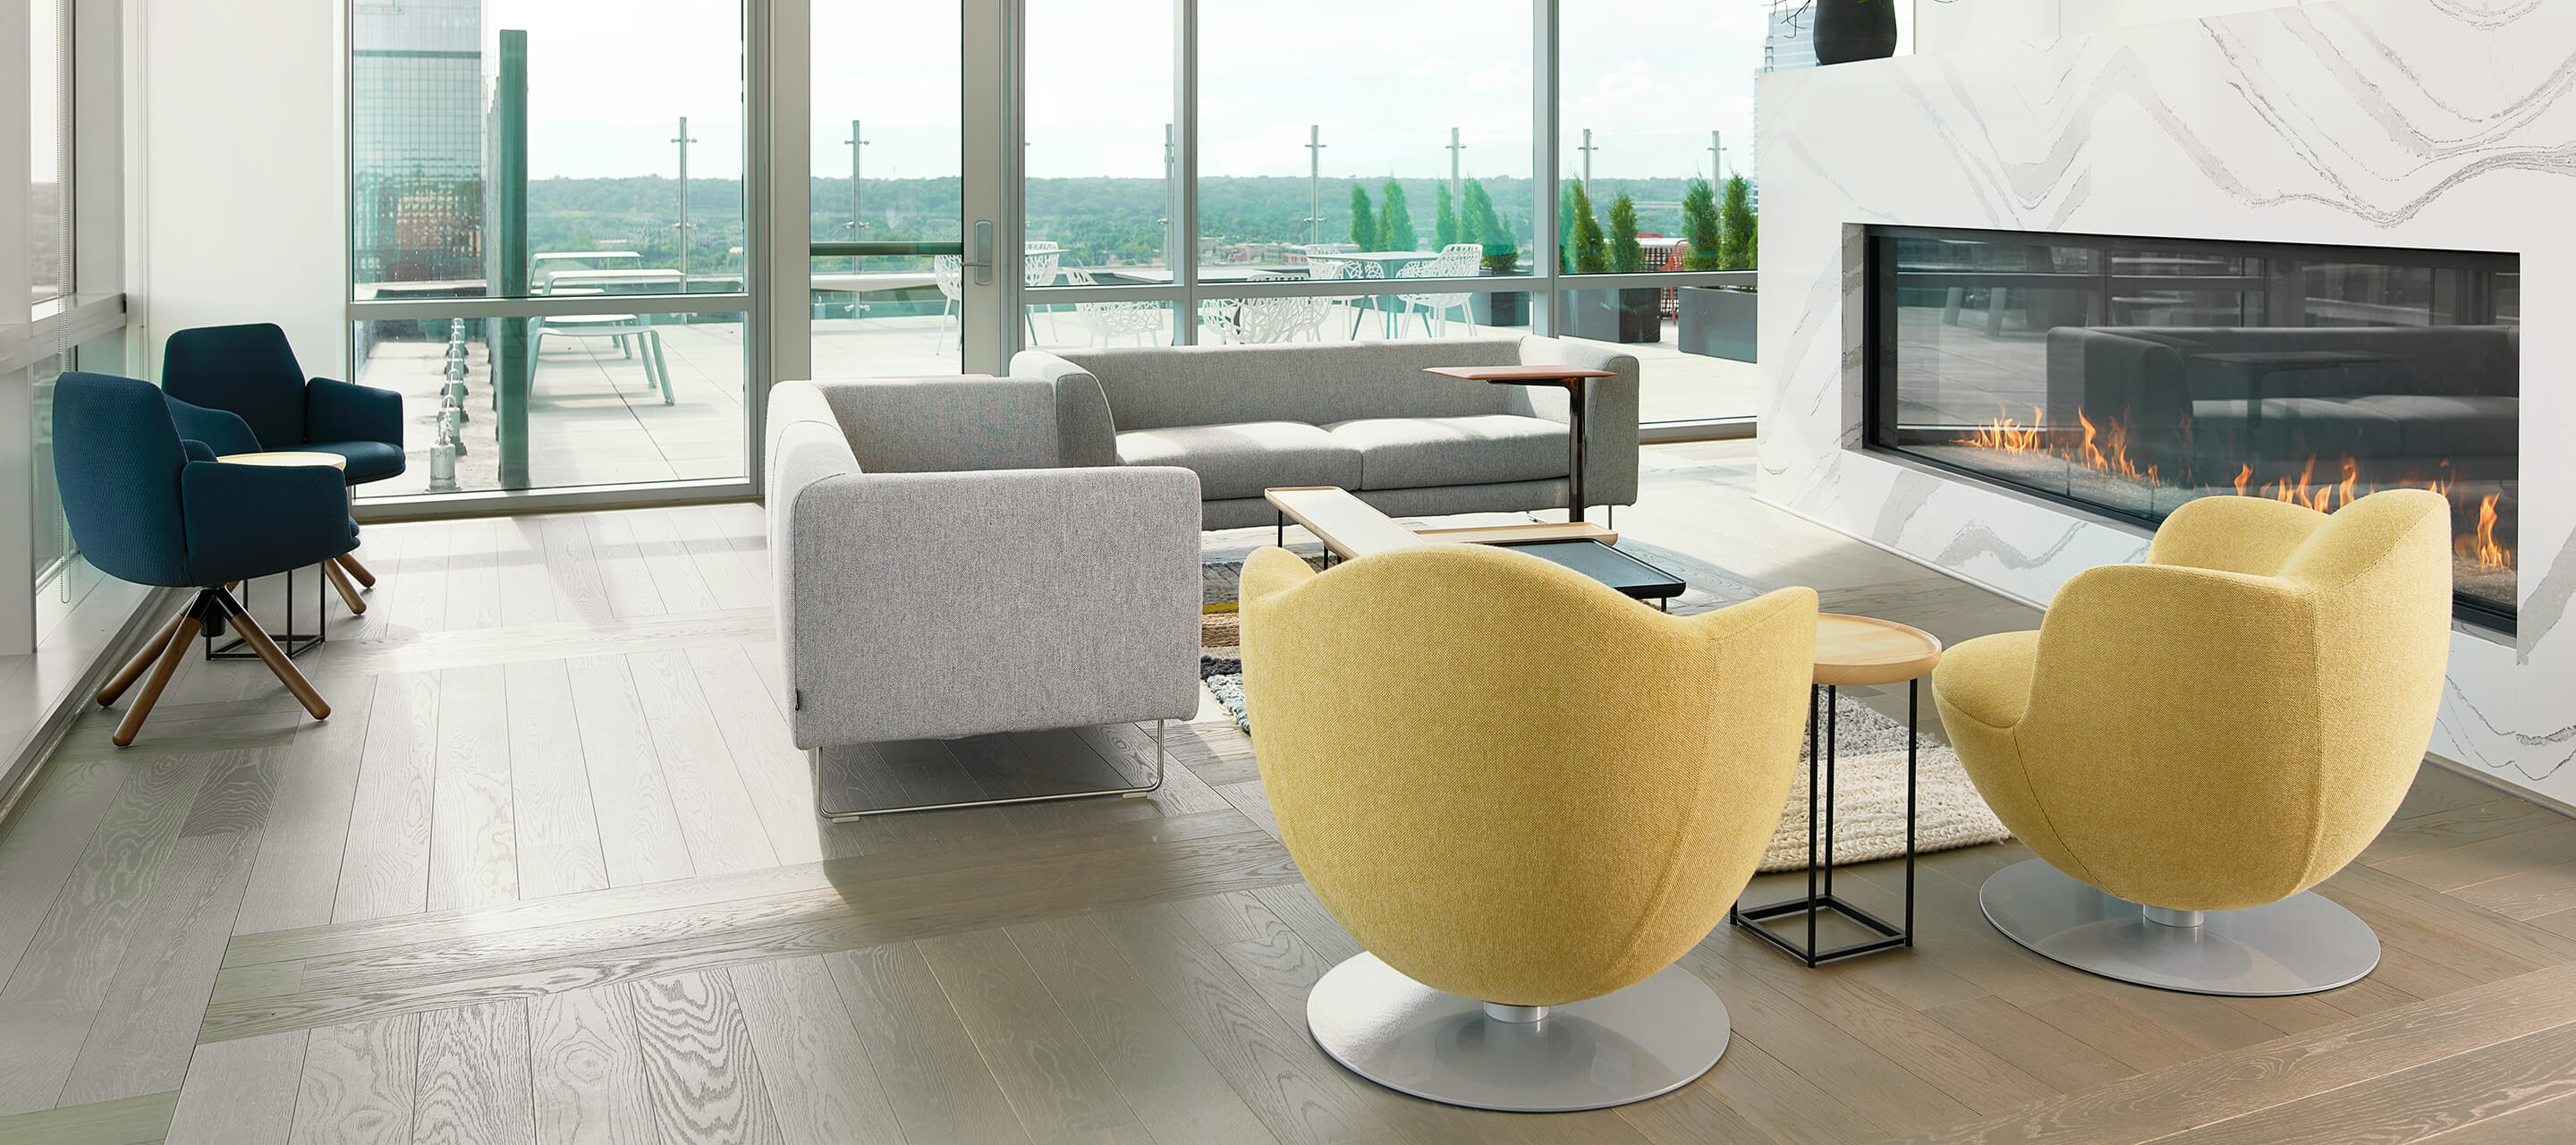 Haworth Poppy chair, LC2 lounge chair, Tulip chairs in a living room